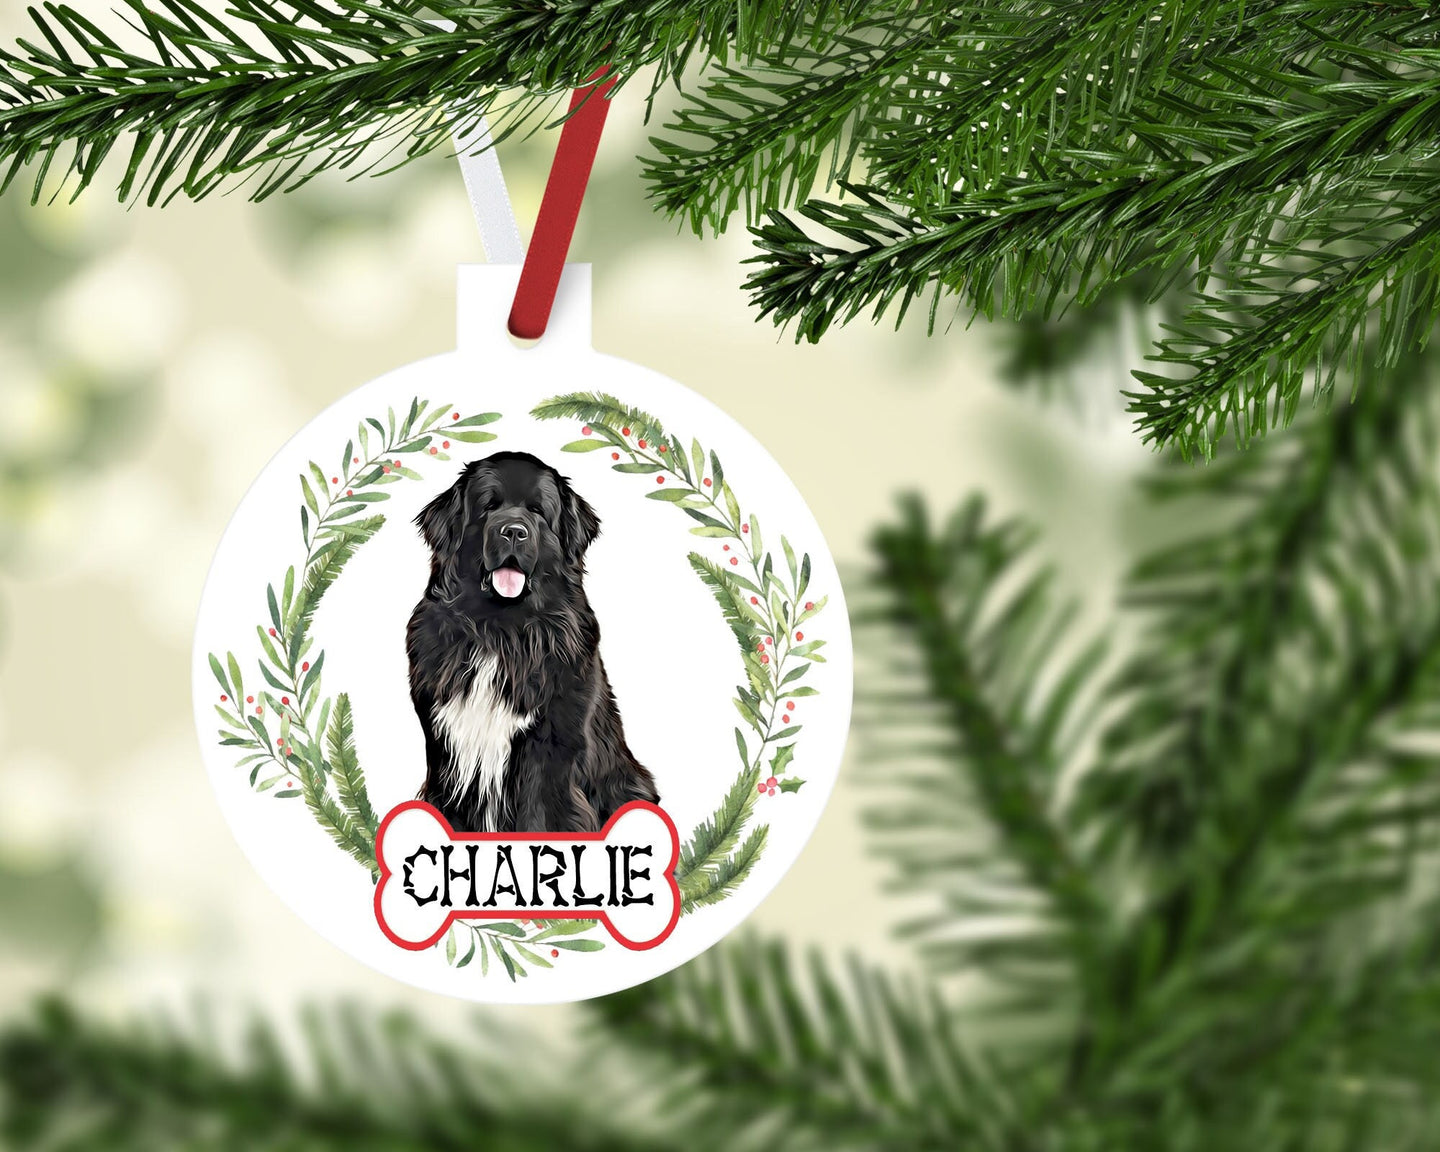 Newfoundland Ornaments. Personalized Gift for the Newfoundland lover! Newfoundland Dog Ornament. Perfect Newfoundland Gift for the dog mom!